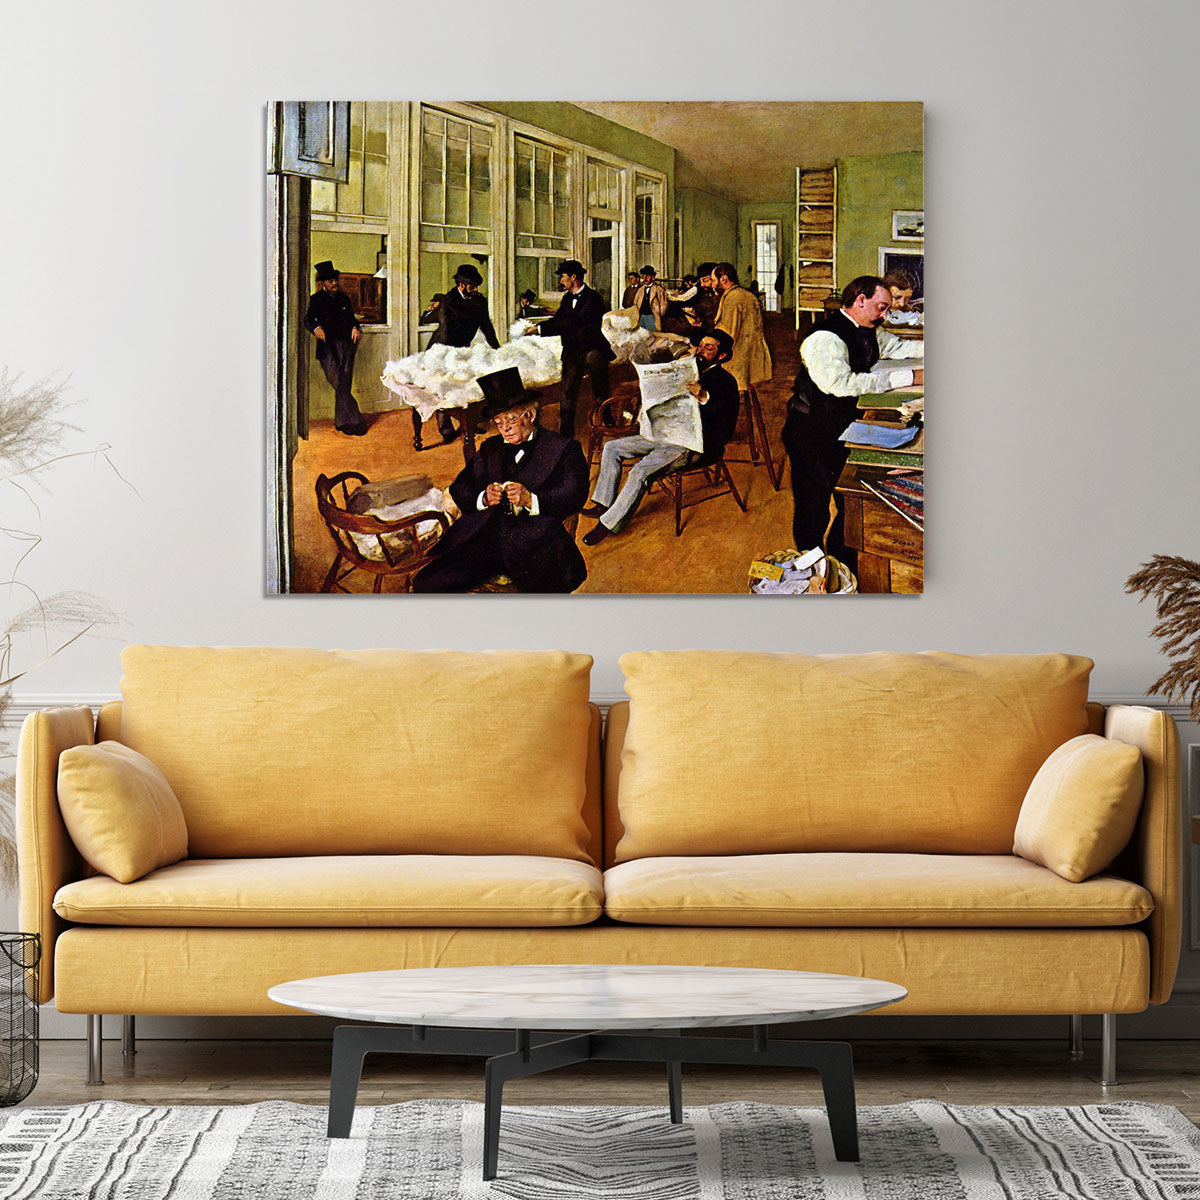 The cotton office in New Orleans by Degas Canvas Print or Poster - Canvas Art Rocks - 4